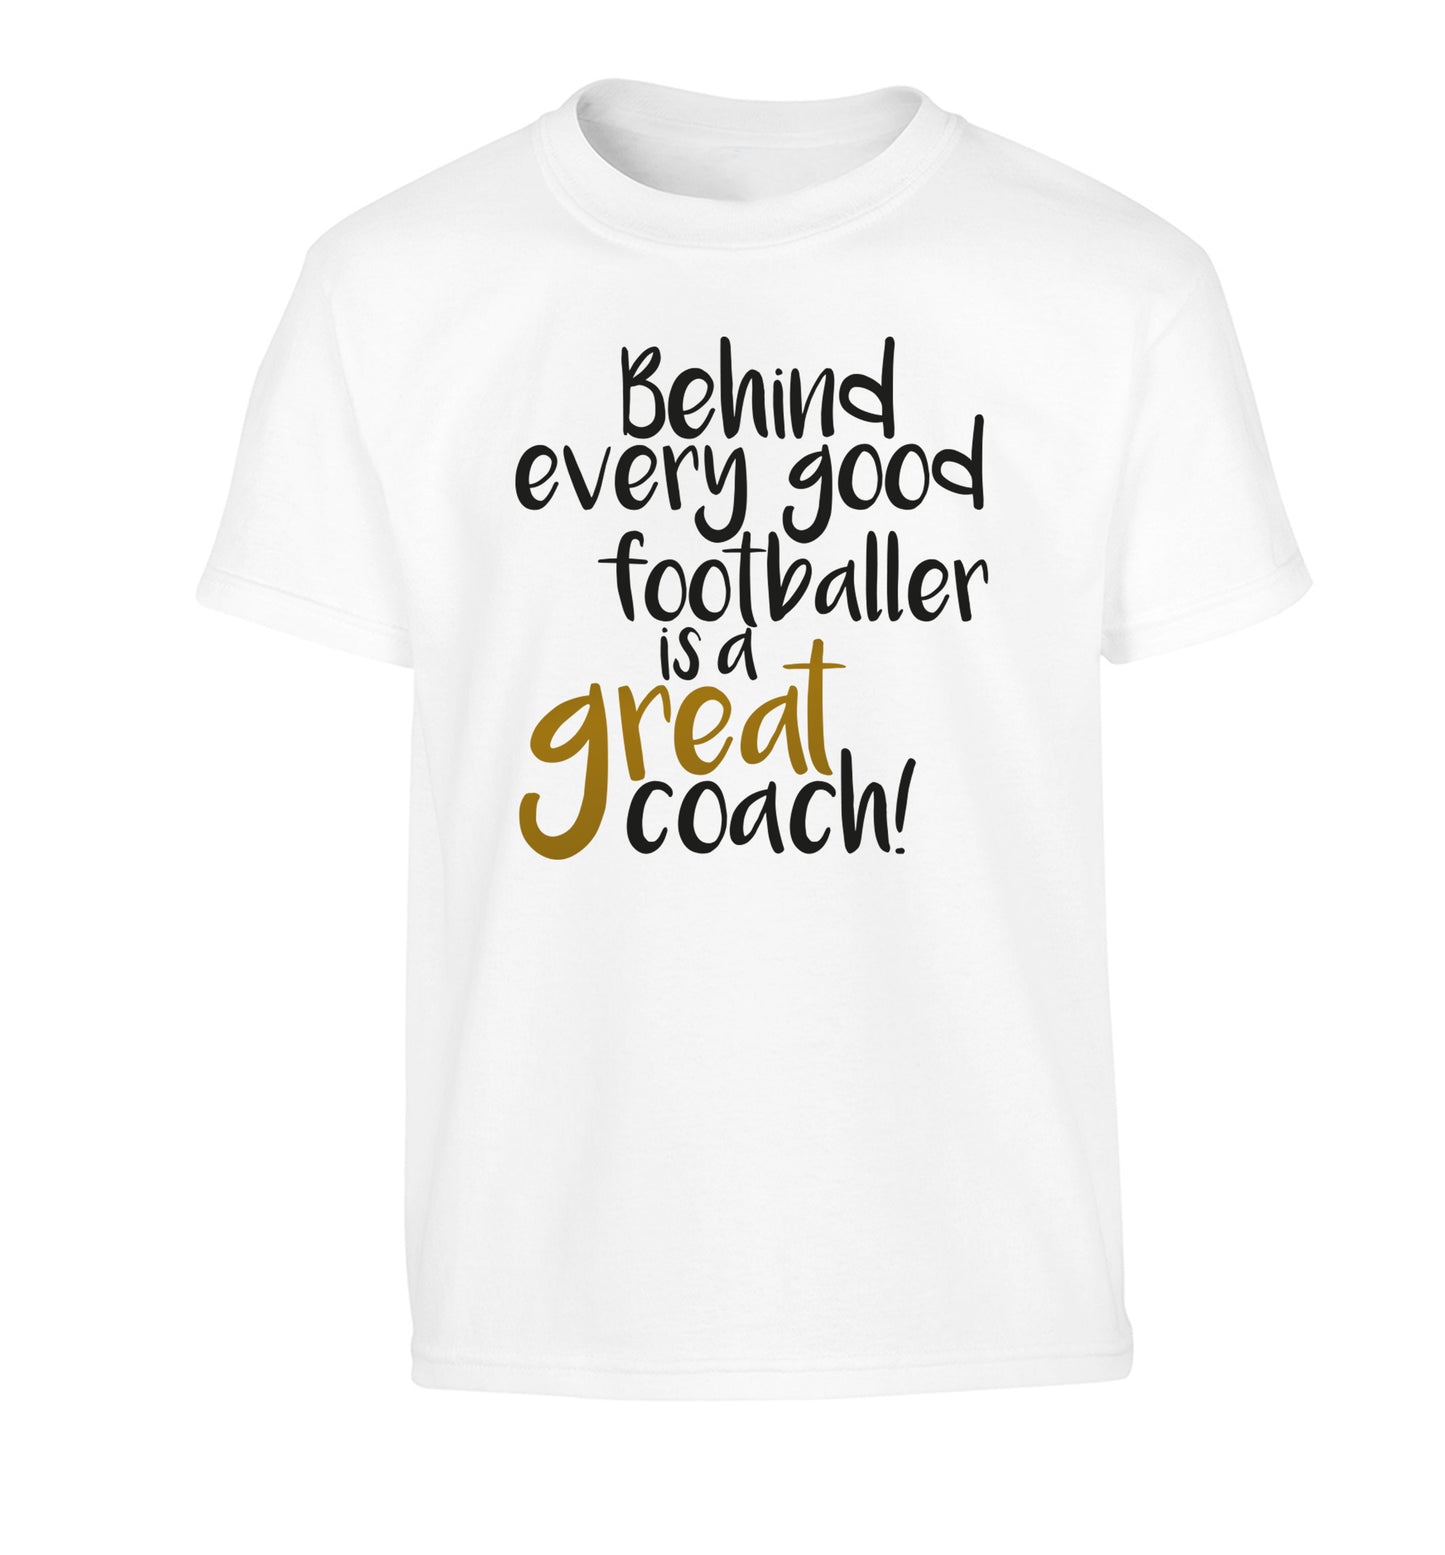 Behind every good footballer is a great coach! Children's white Tshirt 12-14 Years